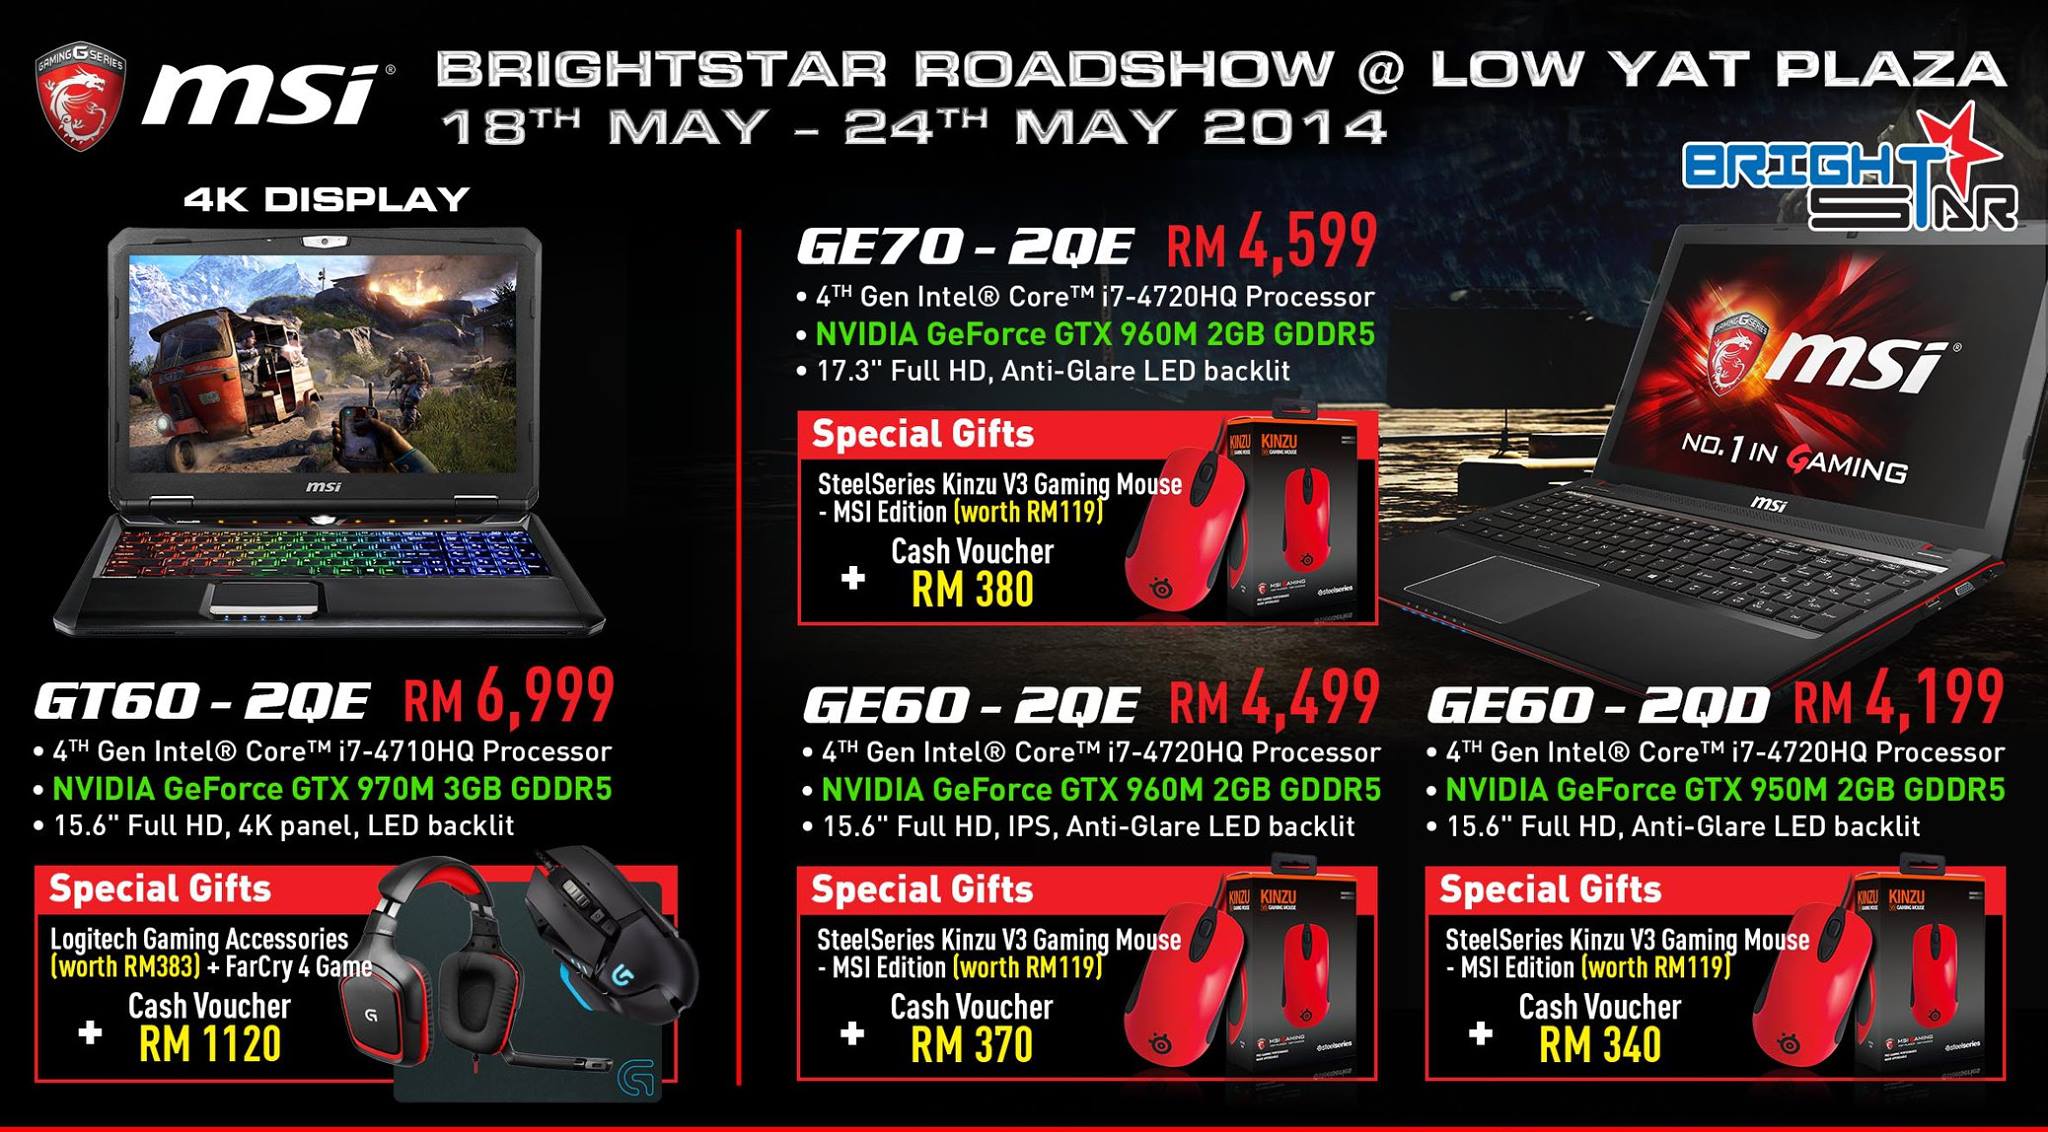 Brightstar Offering up to RM1,120 Cash Voucher on Selected MSI Gaming